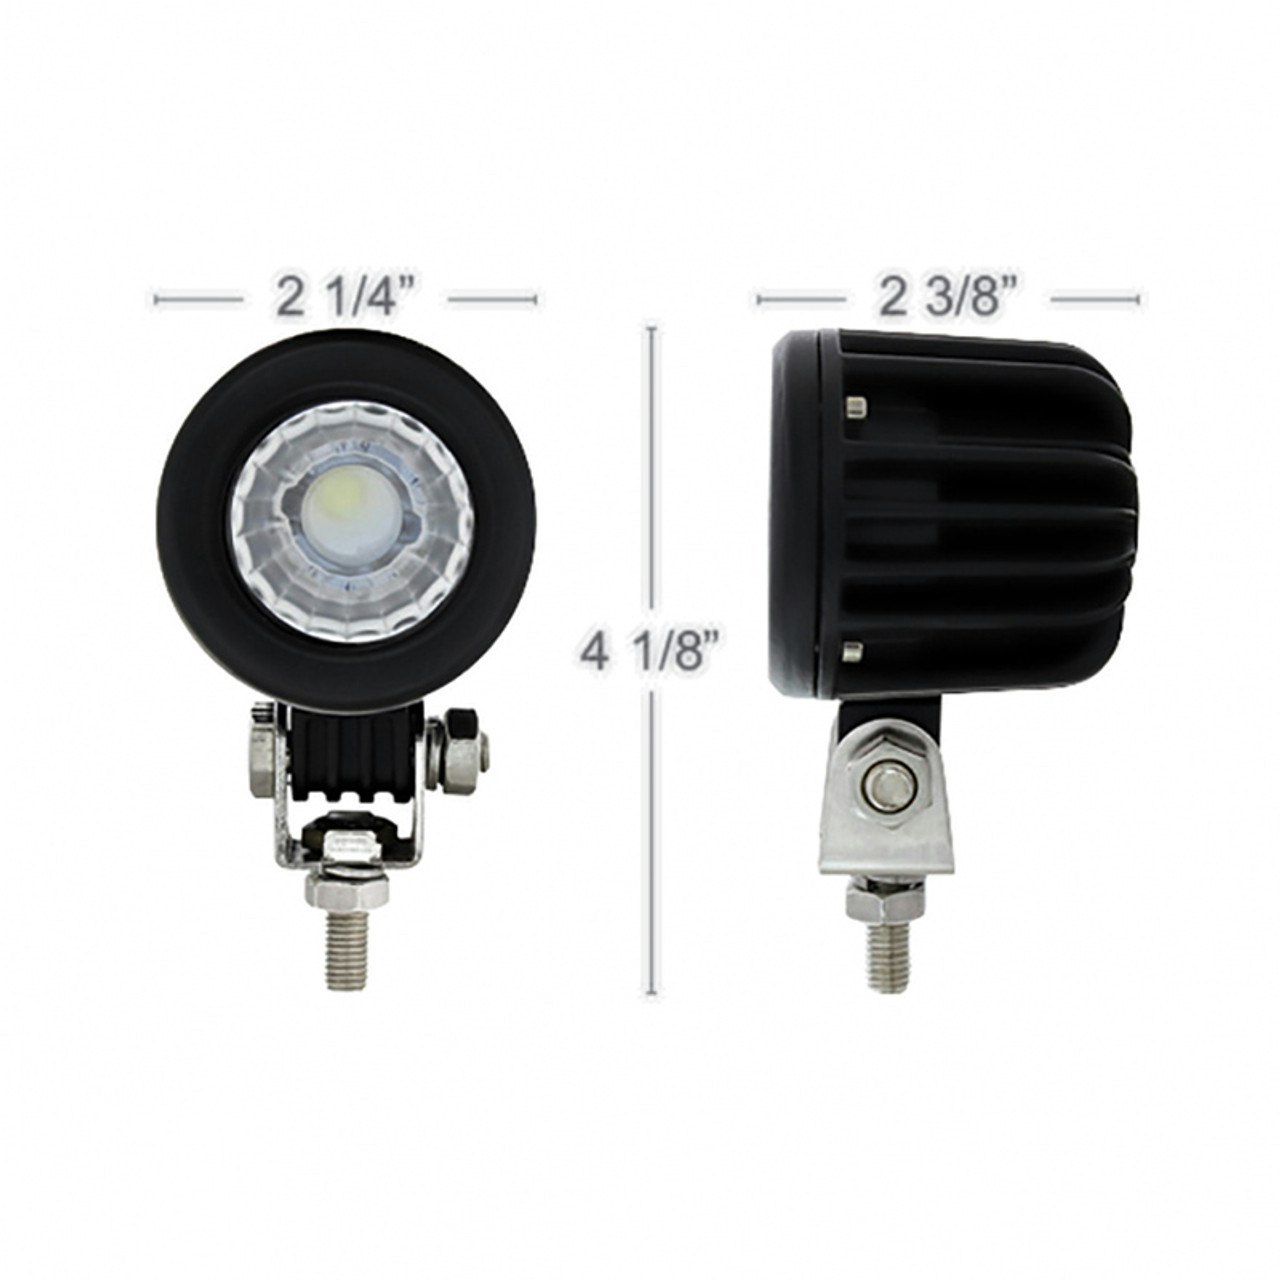 Power LED Mini Work Light With Spot Function - Truck Parts